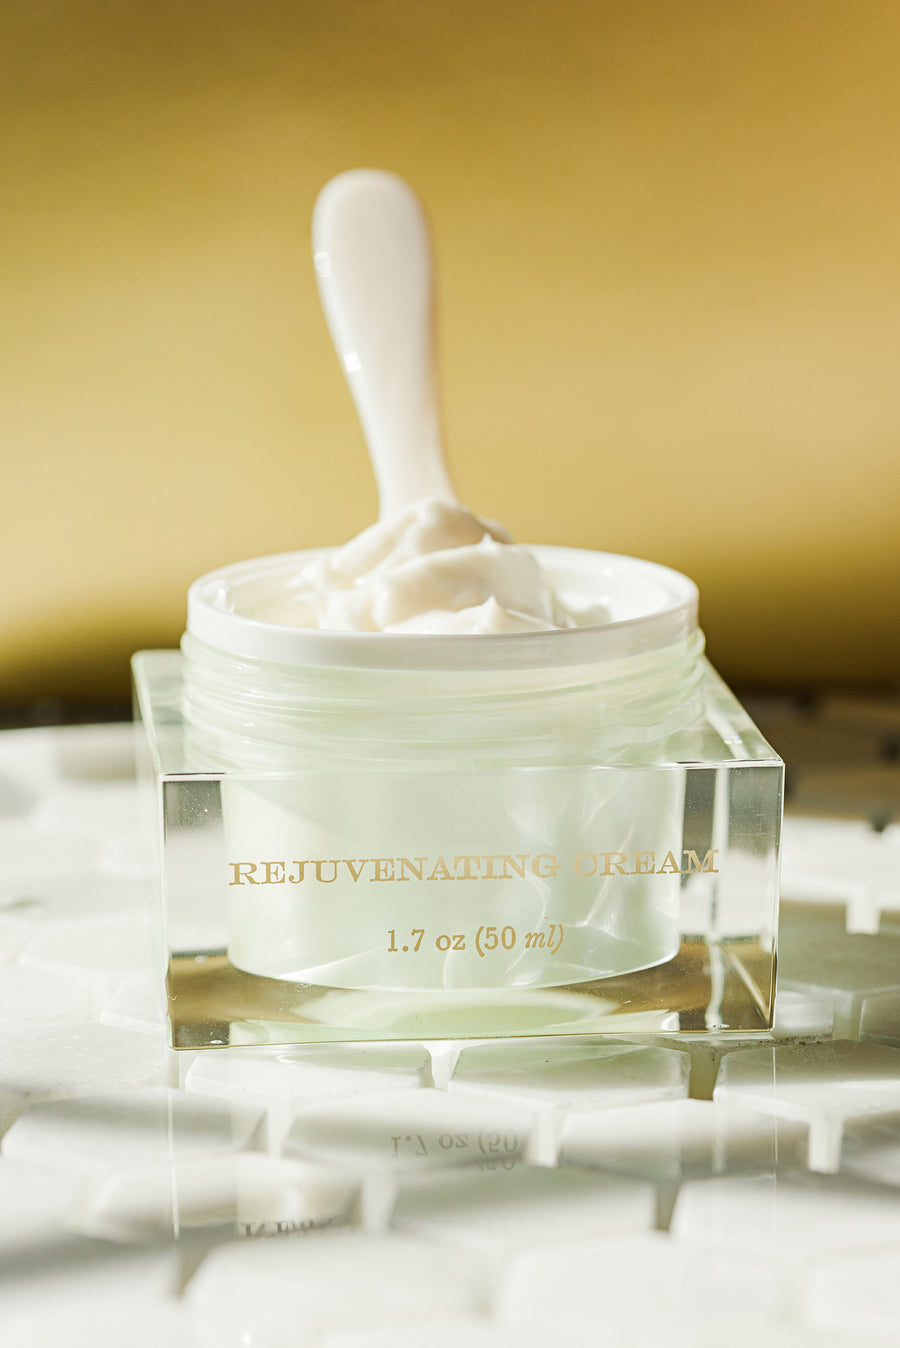 Bioactive peptides, luxury face cream, natural and clean